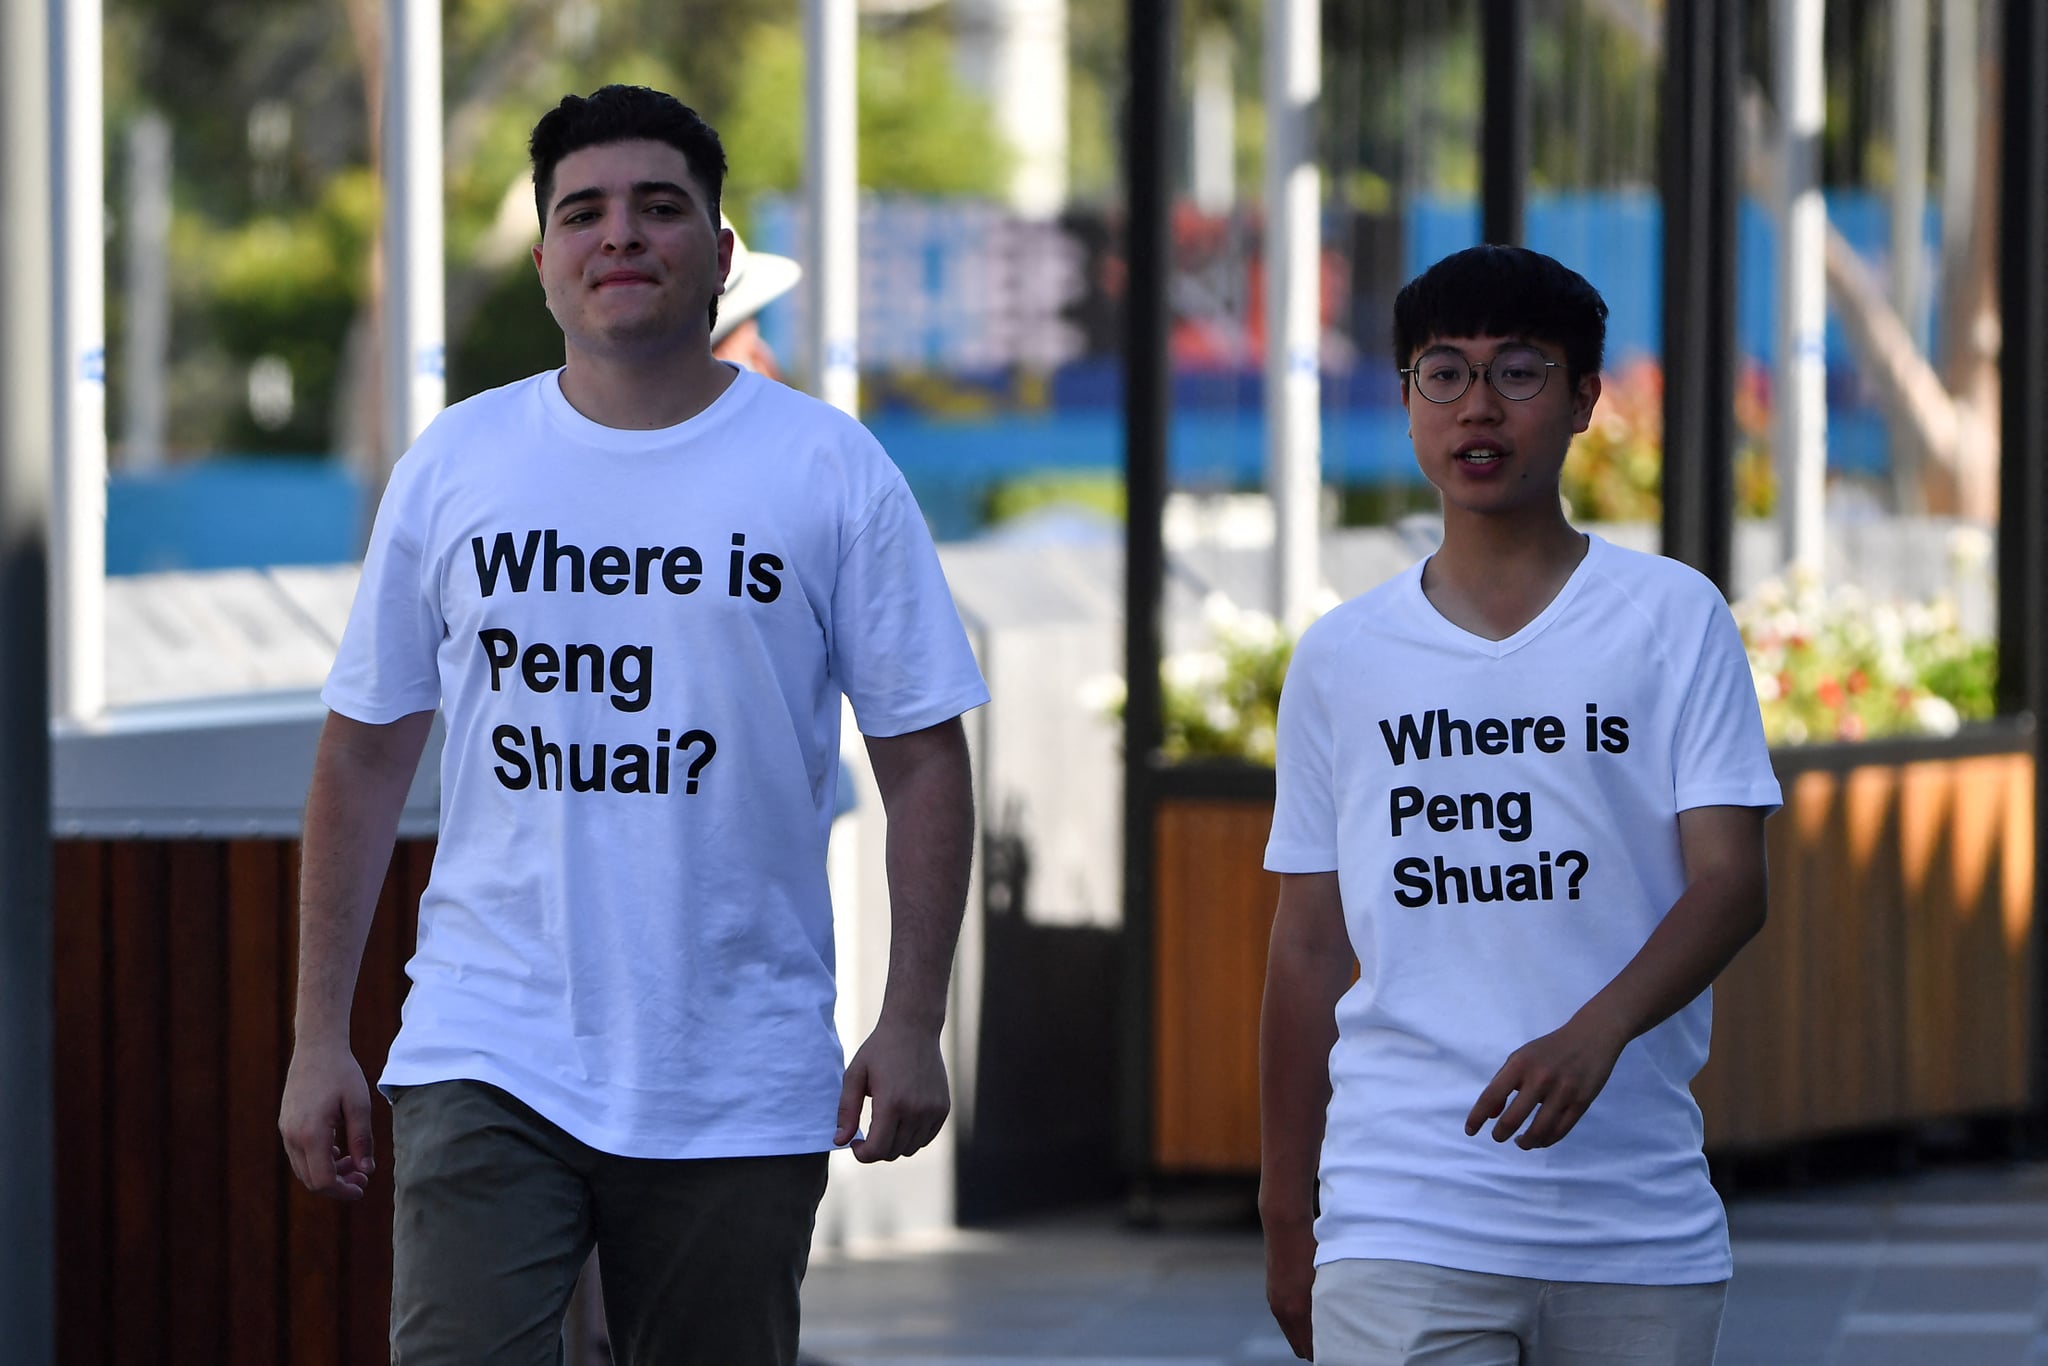 Drew Pavlou (L) is pictured wearing a "Where is Peng Shuai?" t-shirt